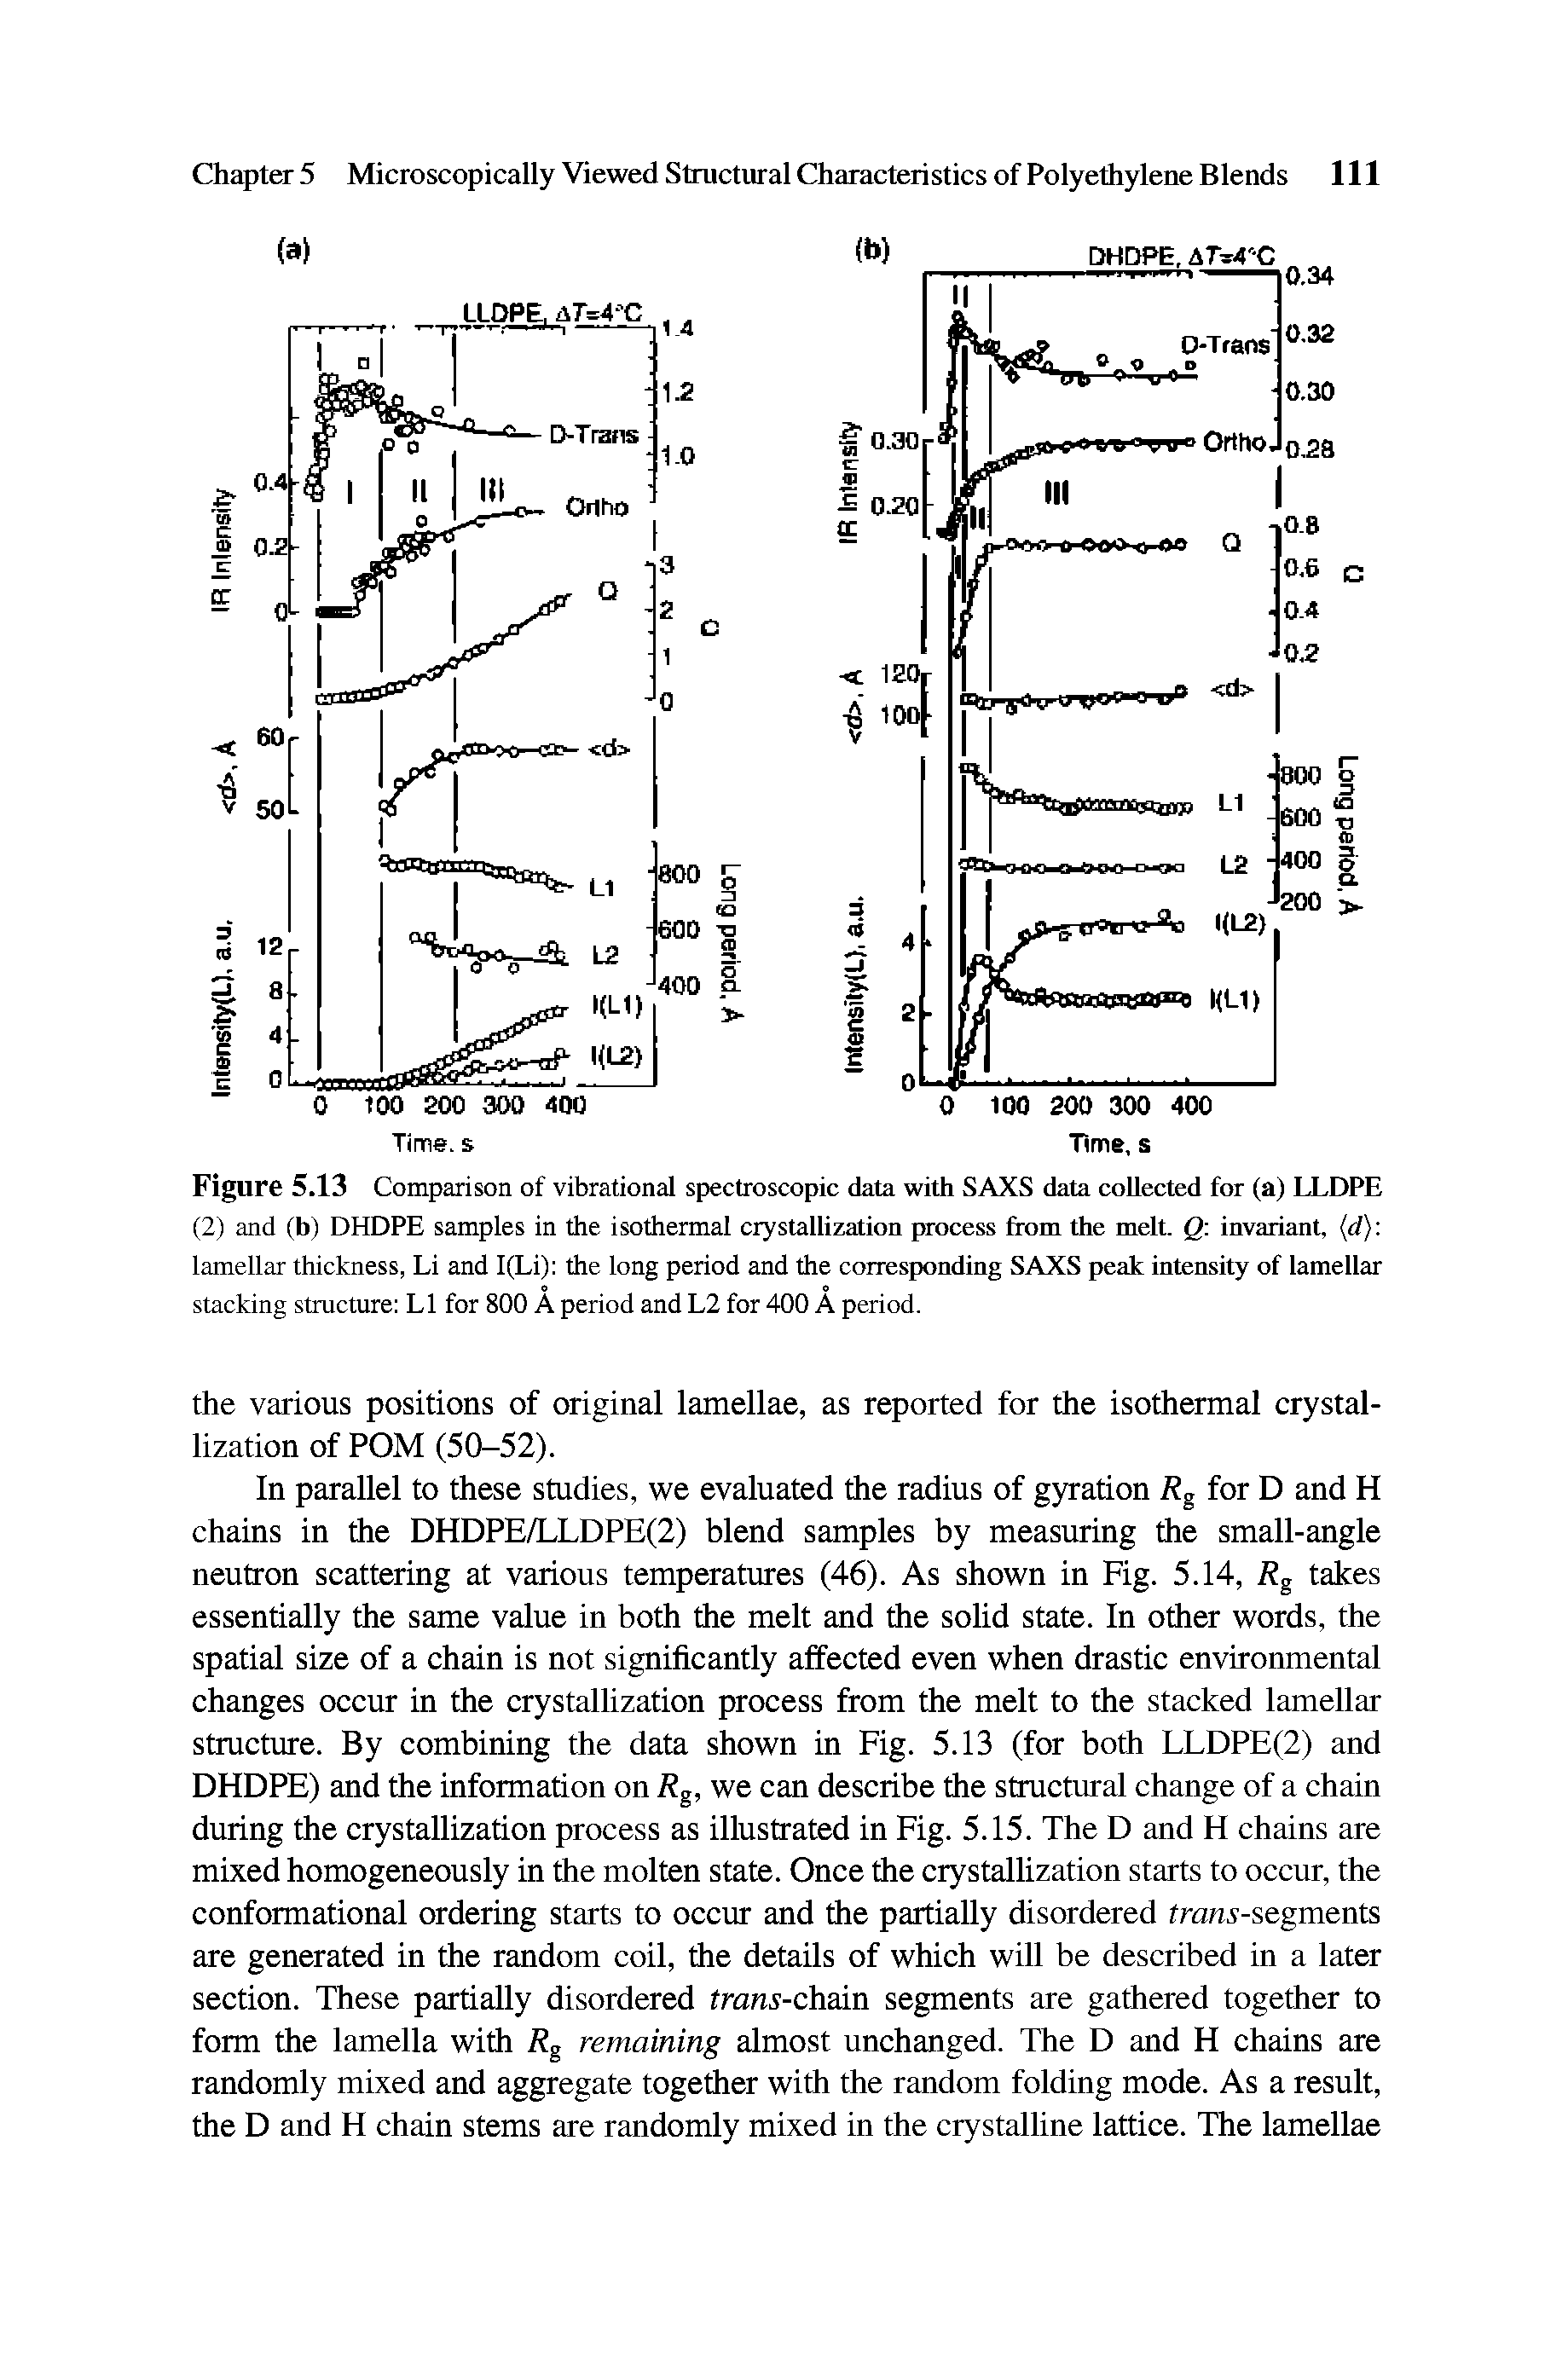 Figure 5.13 Comparison of vibrational spectroscopic data with SAXS data collected for (a) LLDPE (2) and (b) DHDPE samples in the isothermal crystallization process from the melt. Q. invariant, d) lamellar thickness, Li and I(Li) the long period and the corresponding SAXS peak intensity of lamellar stacking structure LI for 800 A period and L2 for 400 A period.